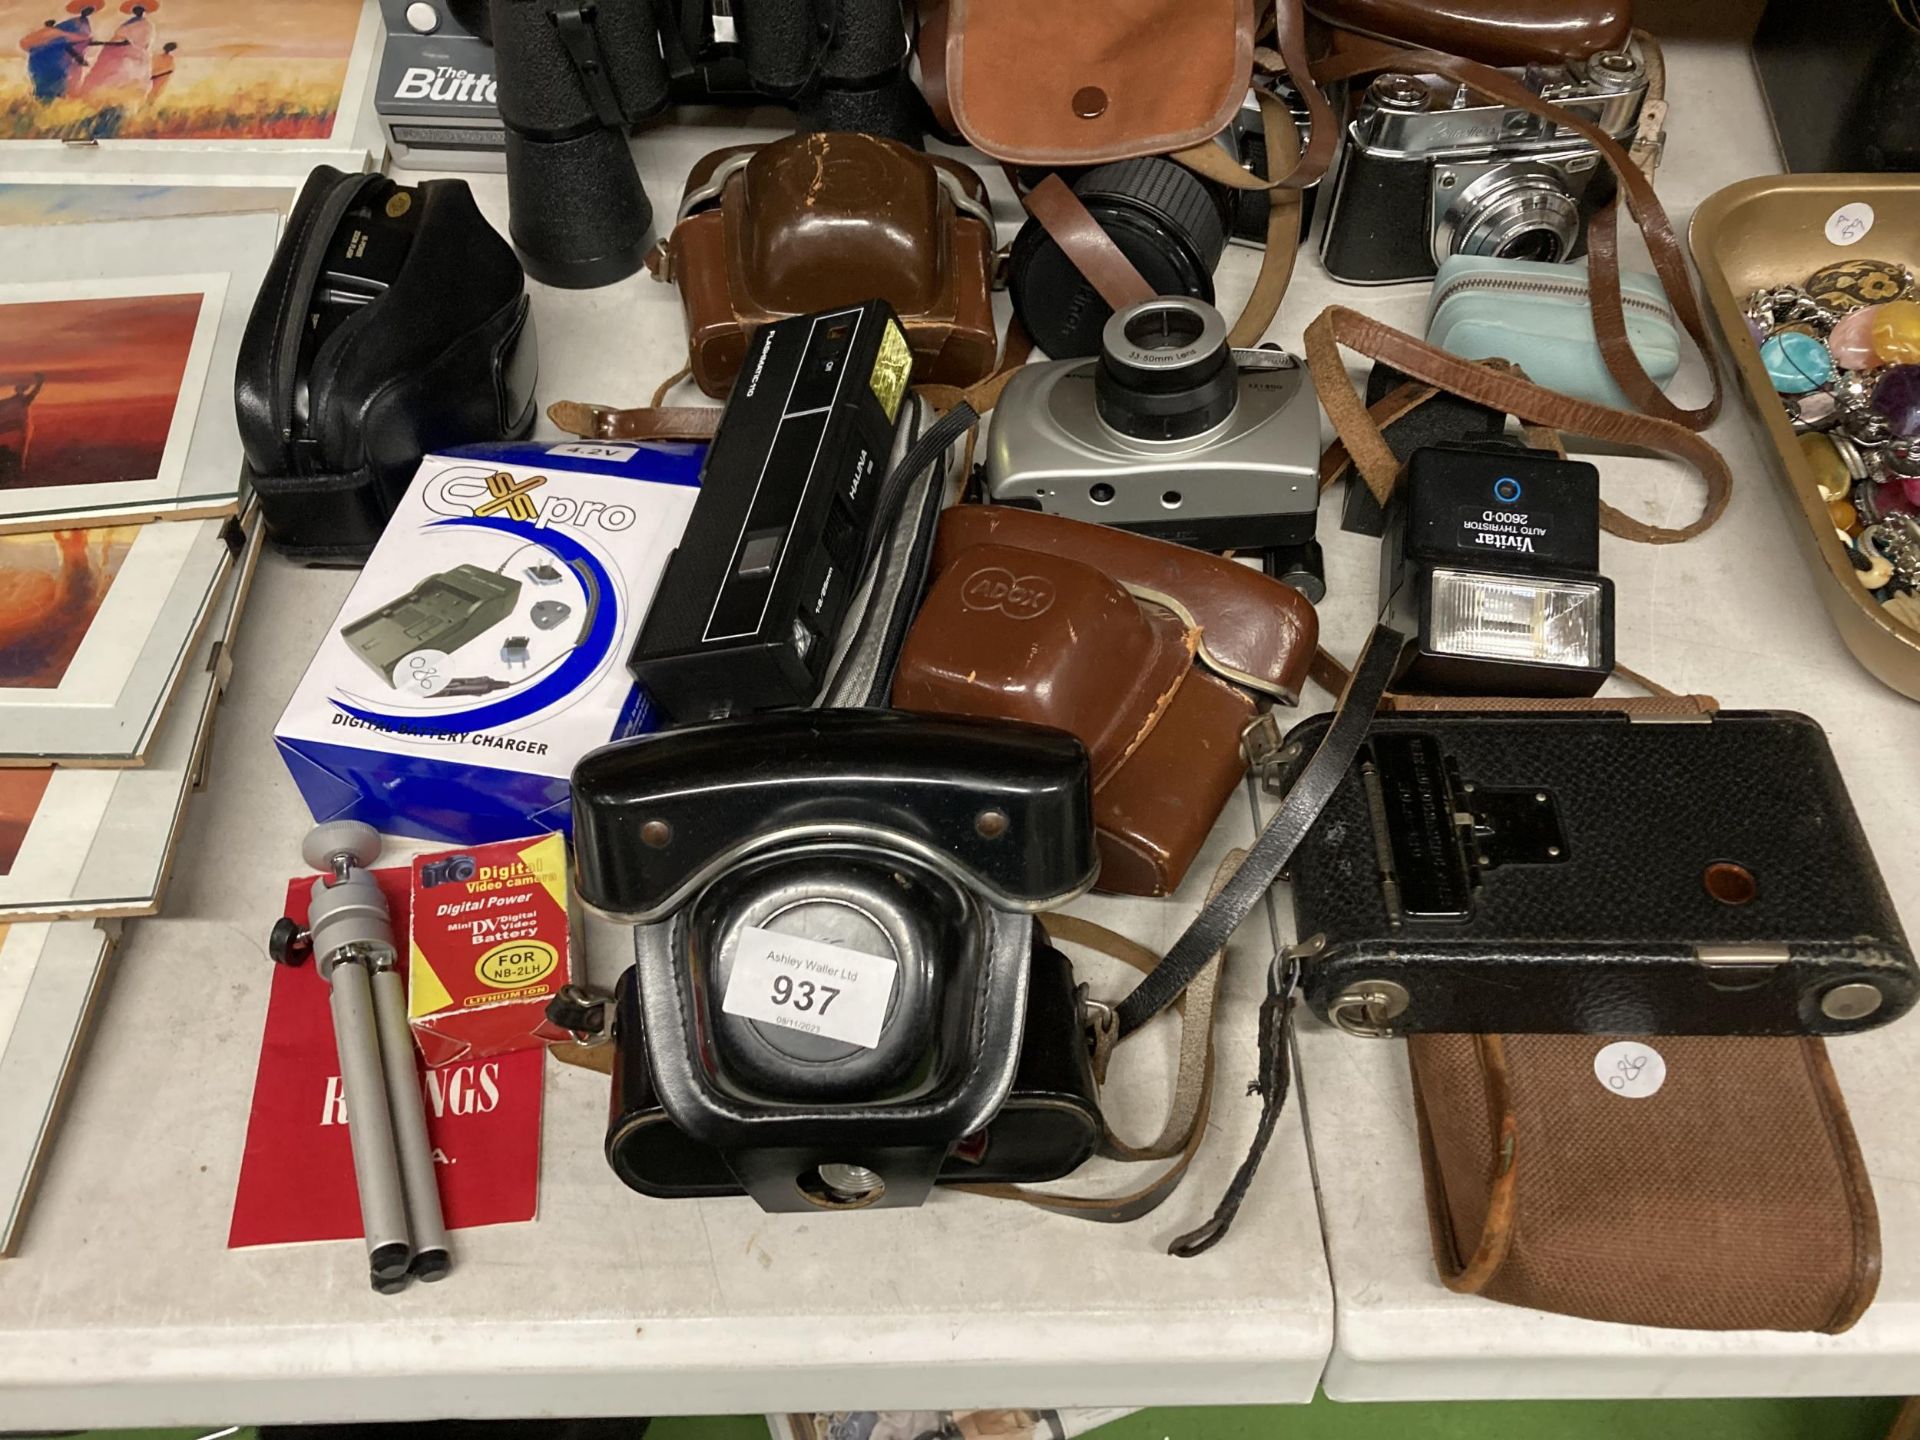 A COLLECTION OF VINTAGE CAMERAS TO INCLUDE HALINA PAULETTE ELECTRIC, KODAK, ADOX, POLAROID EZ1800 - Image 2 of 4